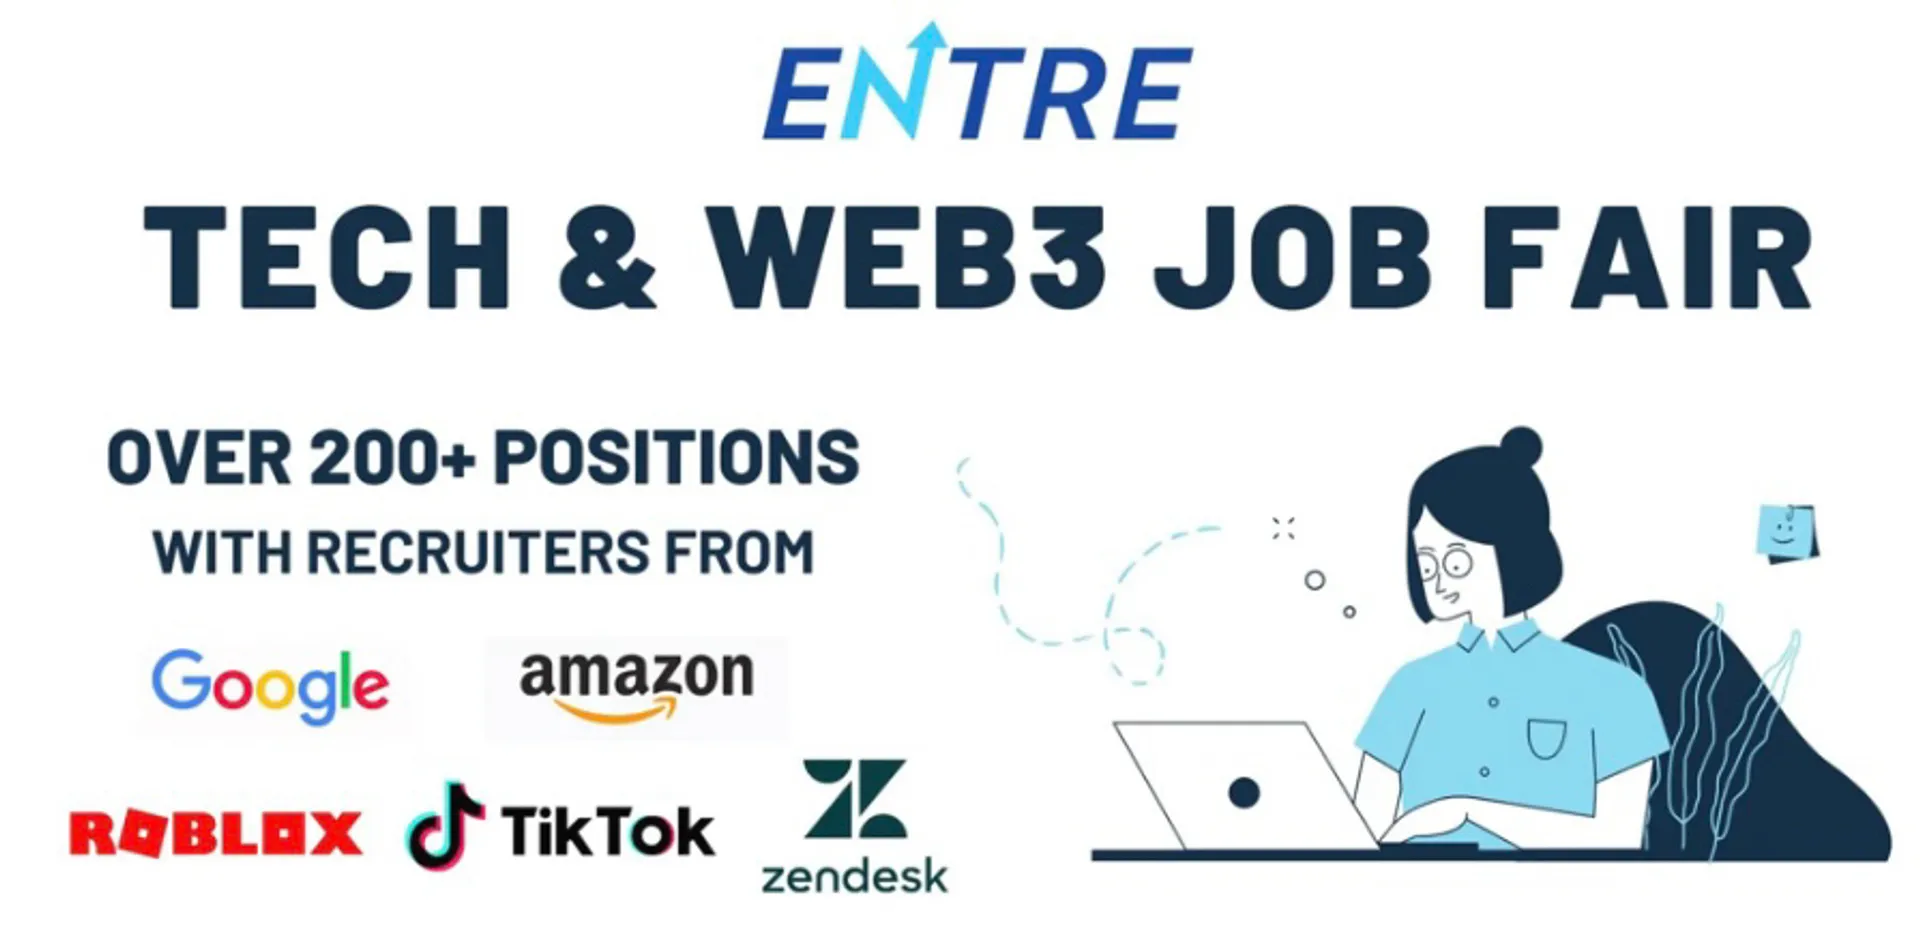 TONIGHT at 7 PM ET on Entre, will be hosting a Tech Career Fair featuring recruiters and hiring managers, you can register now and add to your calendar.  

Forward to your brothers, sisters, cousins, nephews, nieces, bf’s/gf’s, church family, Facebook groups, etc, spread the word!

RSVP HERE: joinentre.com/event/629134b6016a850009036ea6